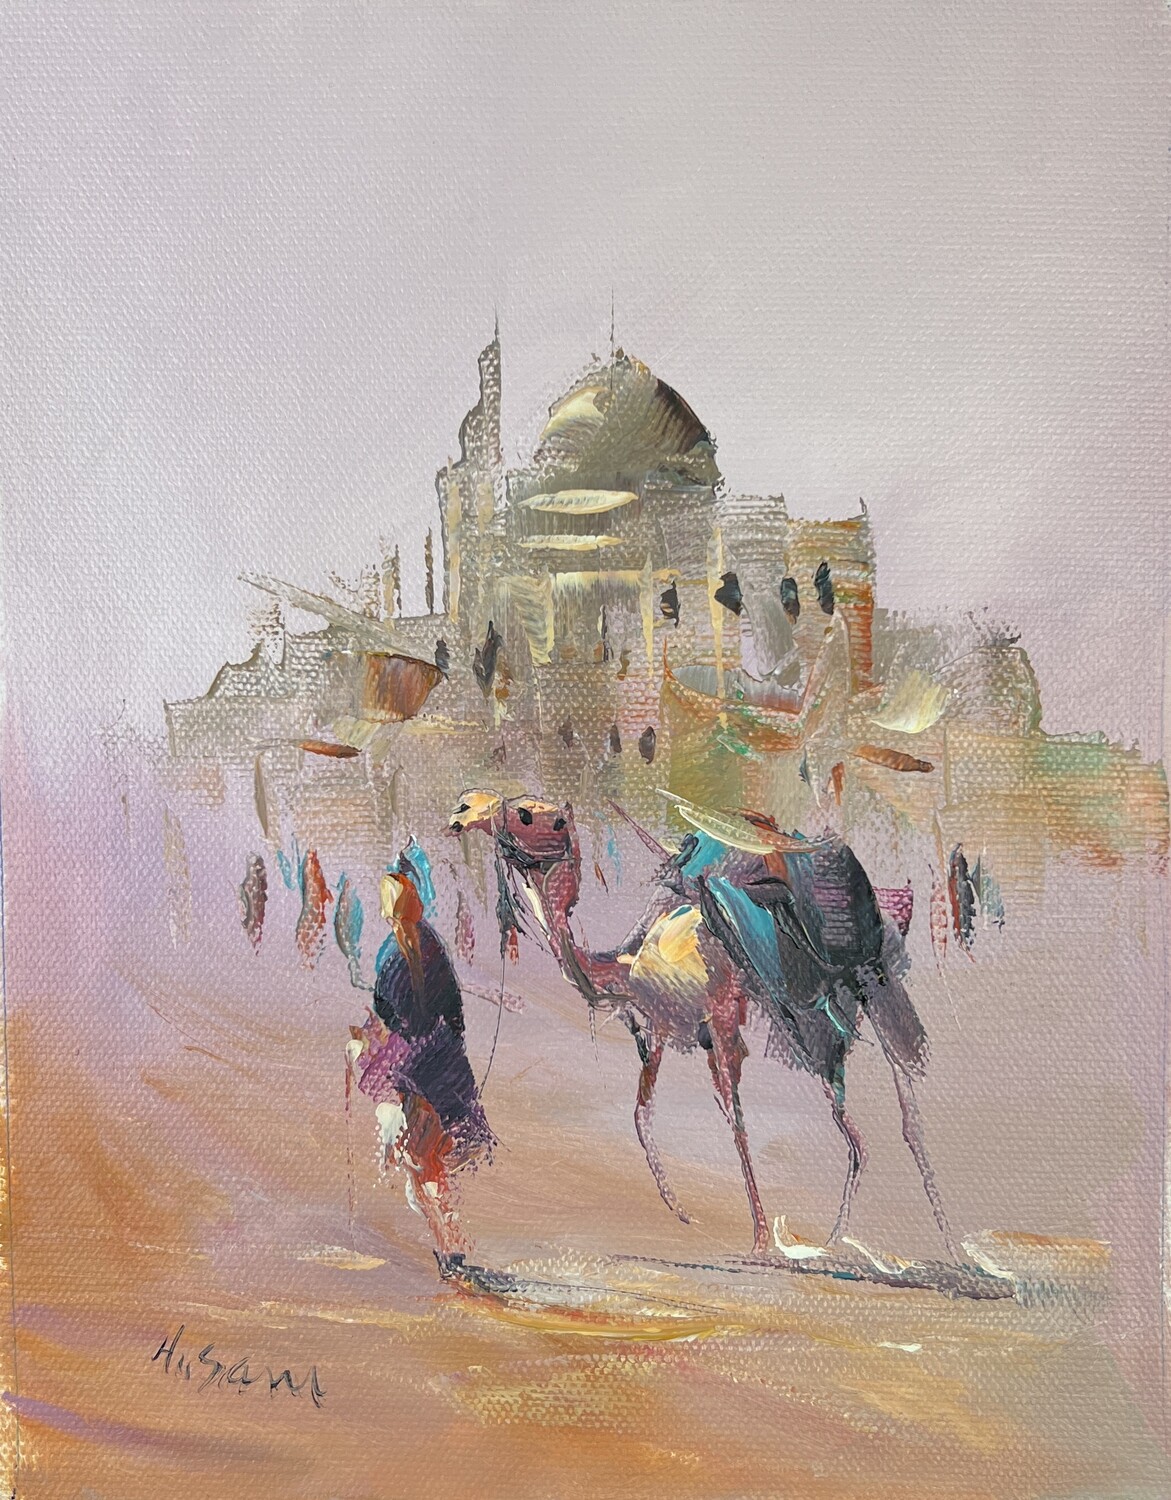 Desert Villagers and Mosque - Knife Art Oil Painting